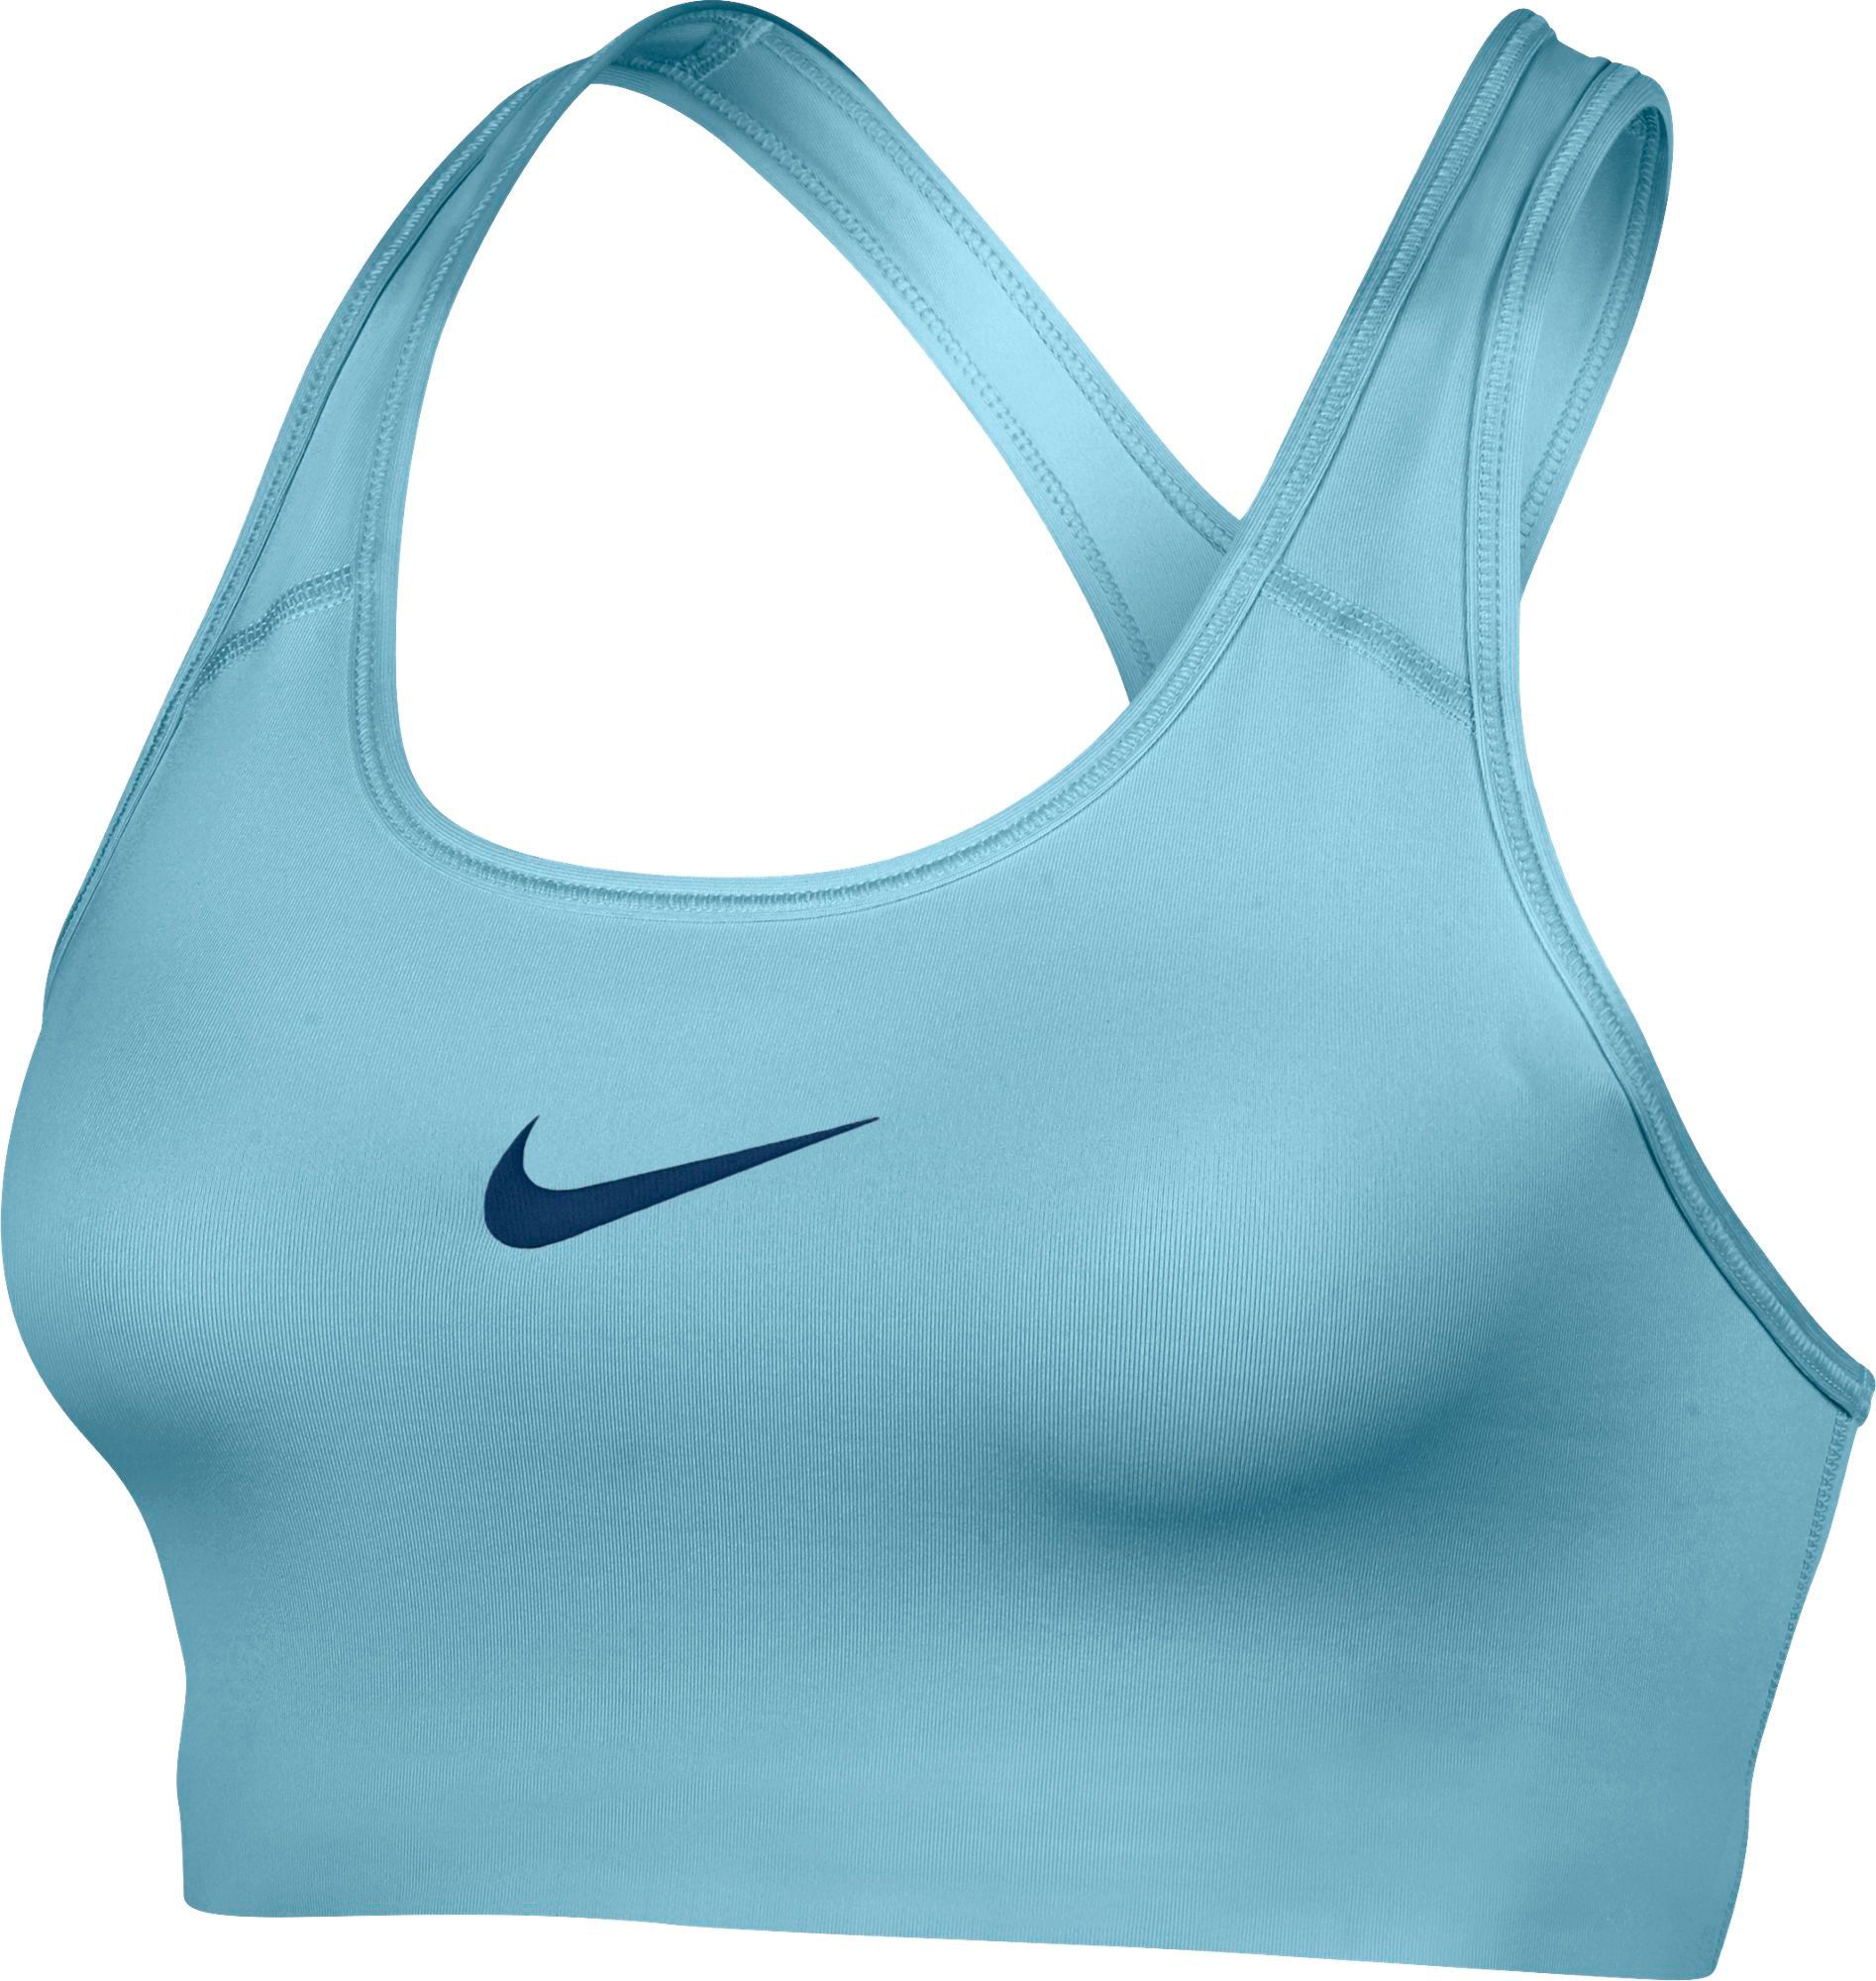 Sports Bras - Athletic | DICK'S Sporting Goods